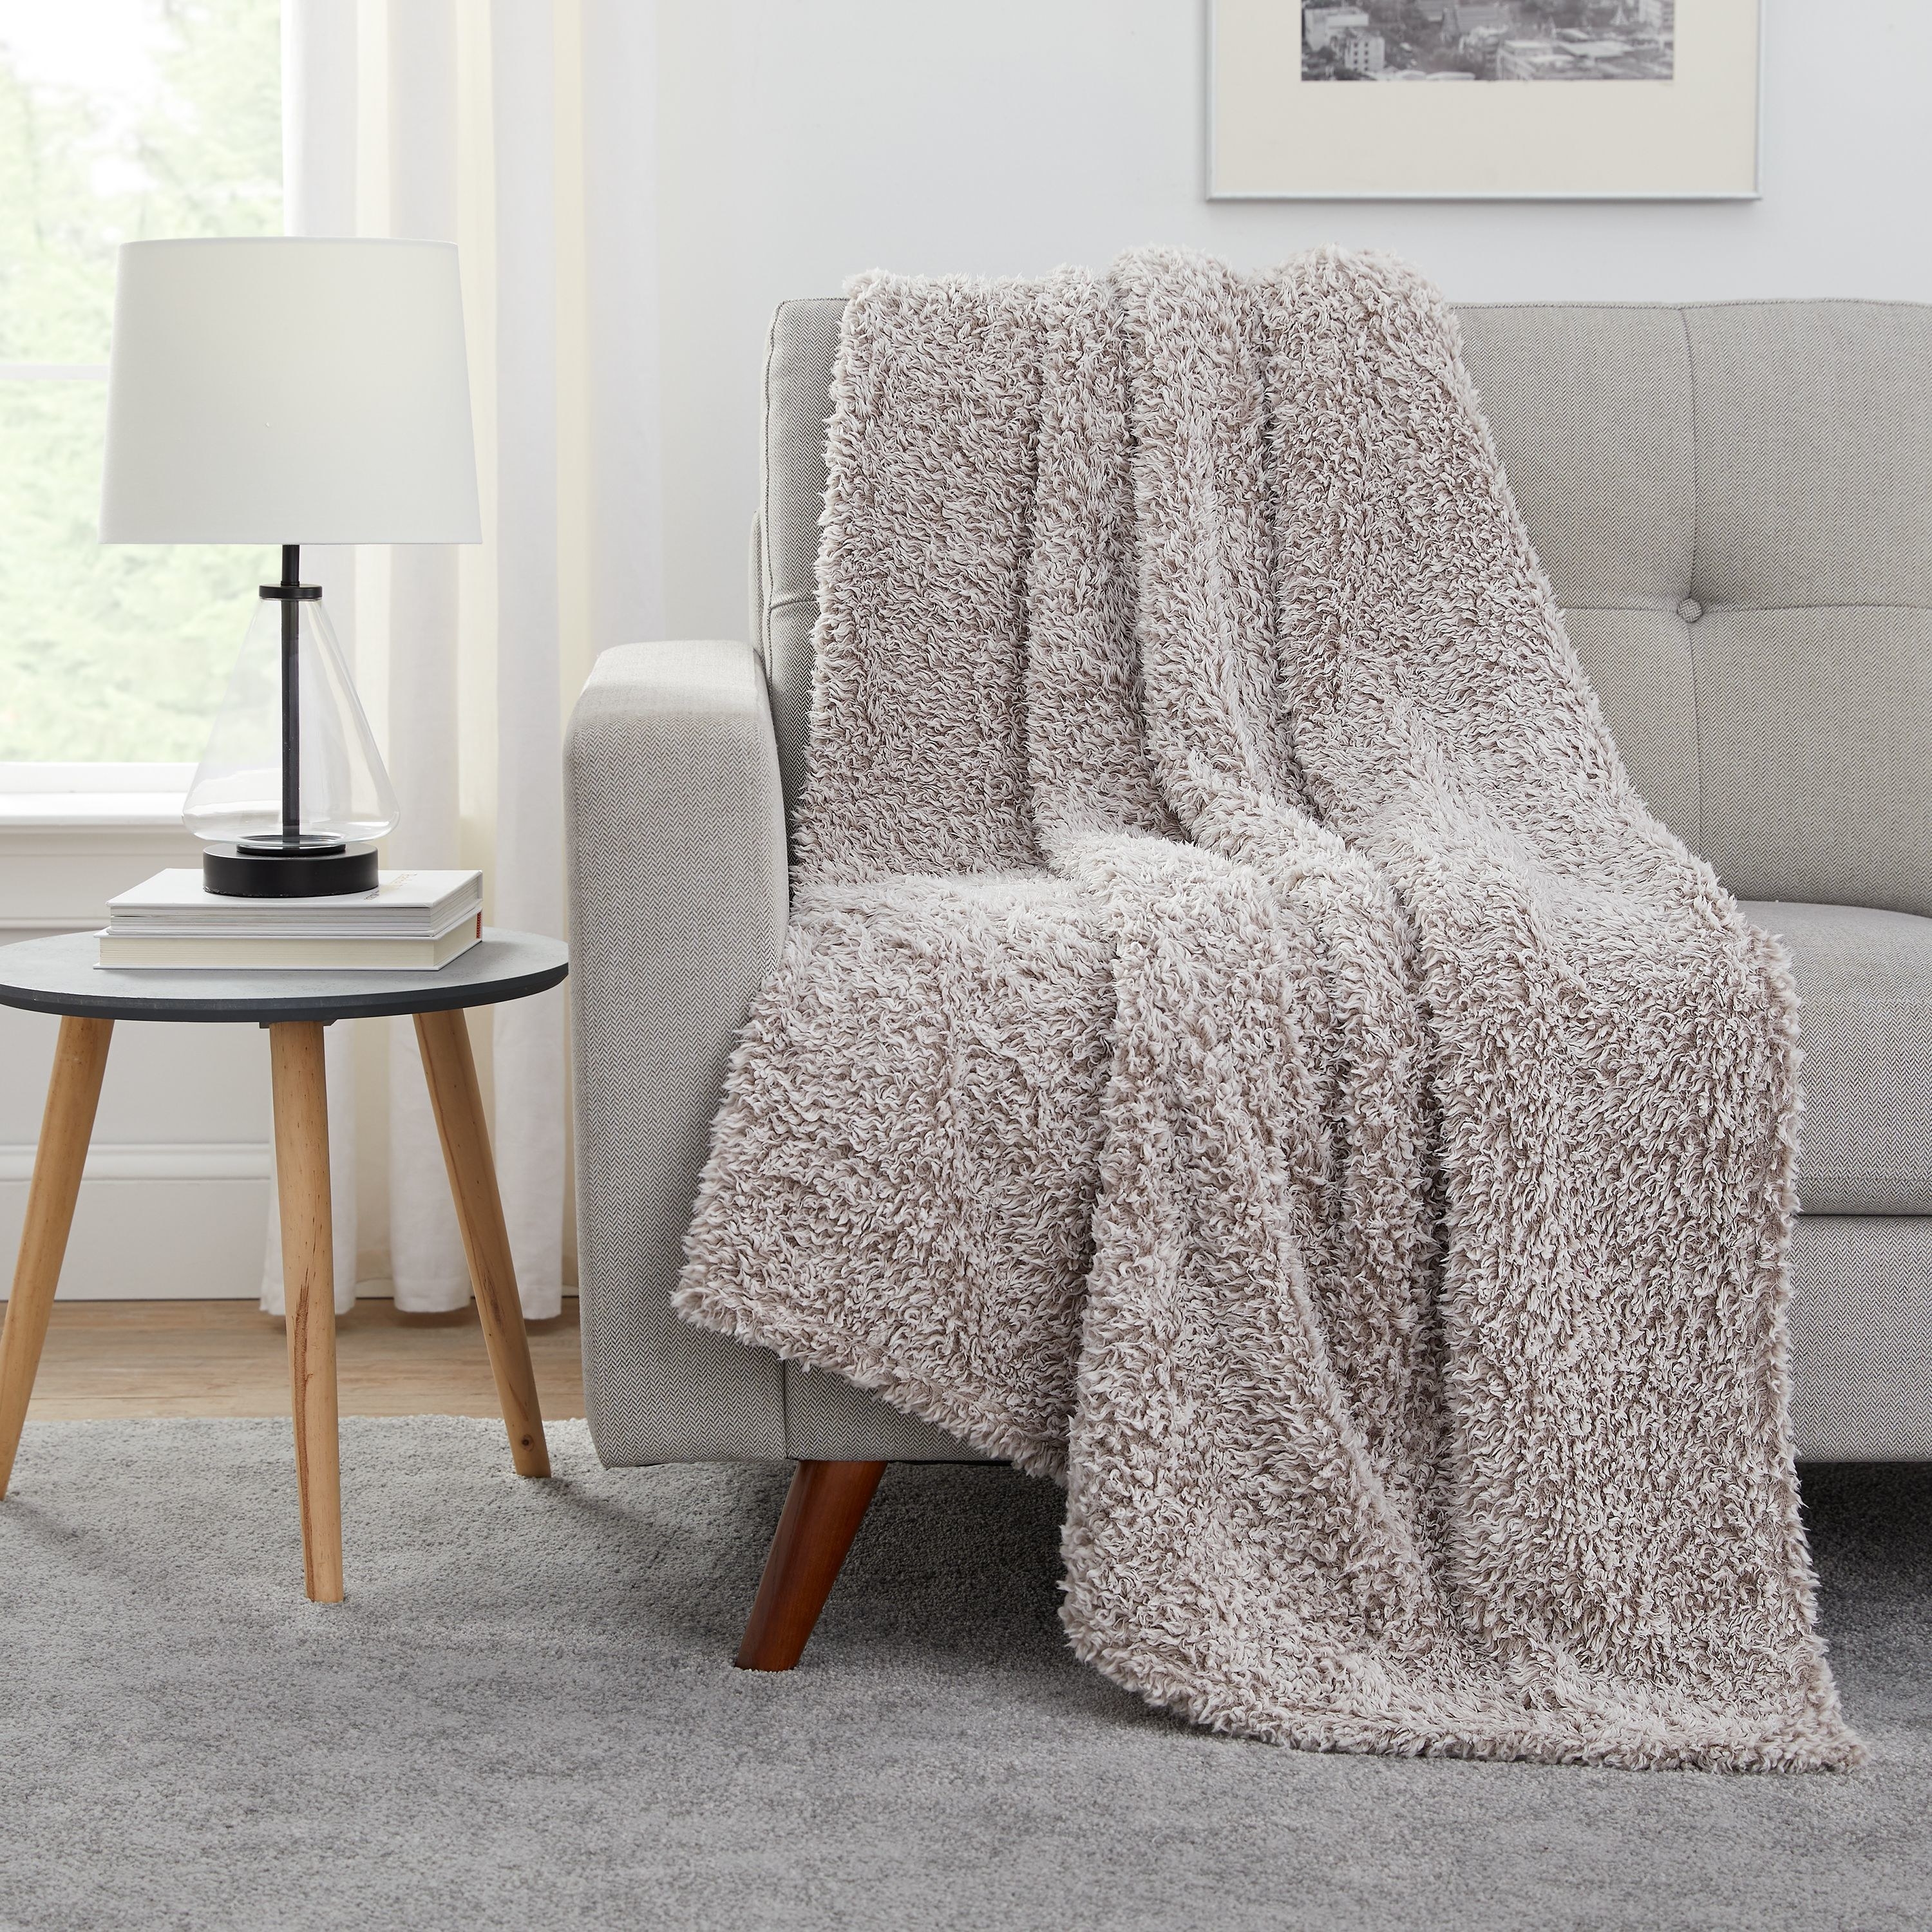 taupe sherpa throw blanket draped on a chair